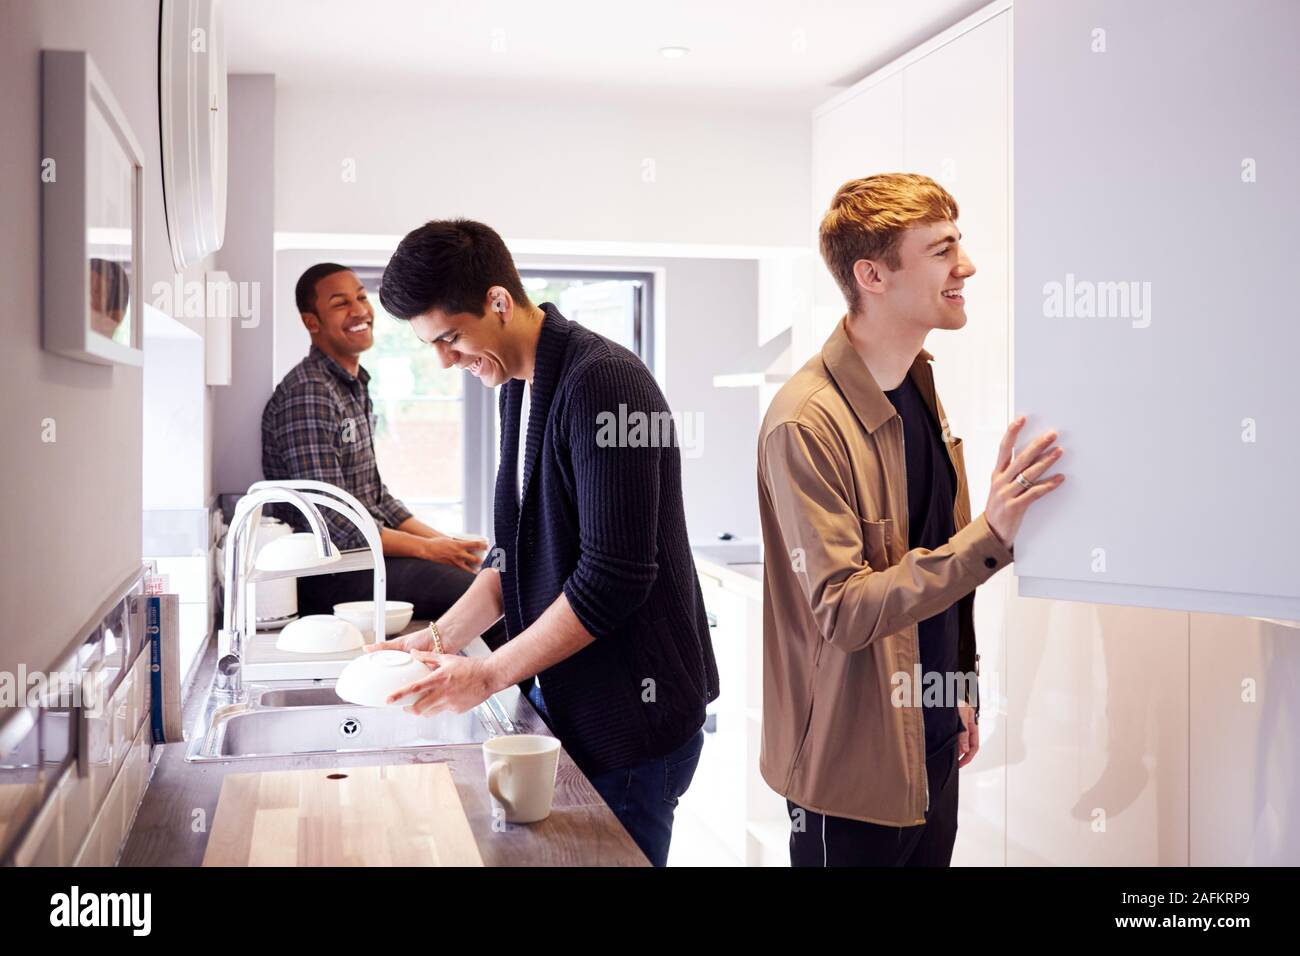 Group Of Male College Students In Shared House Kitchen Washing Up And Hanging Out Together Stock Photo